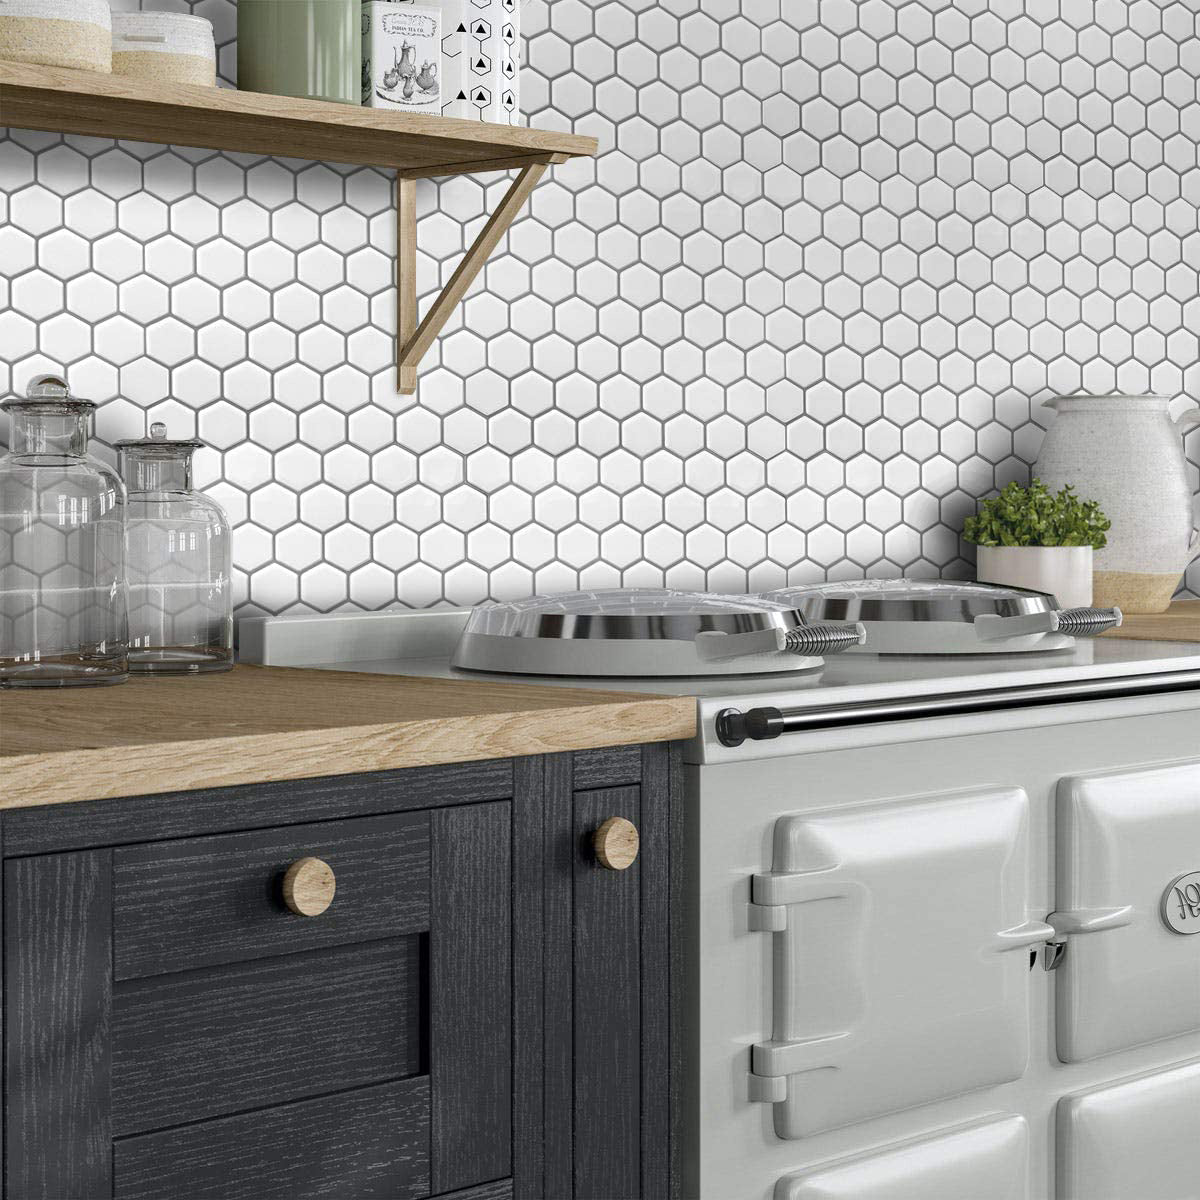 White hexagon tiles with grey grout in the kitchen